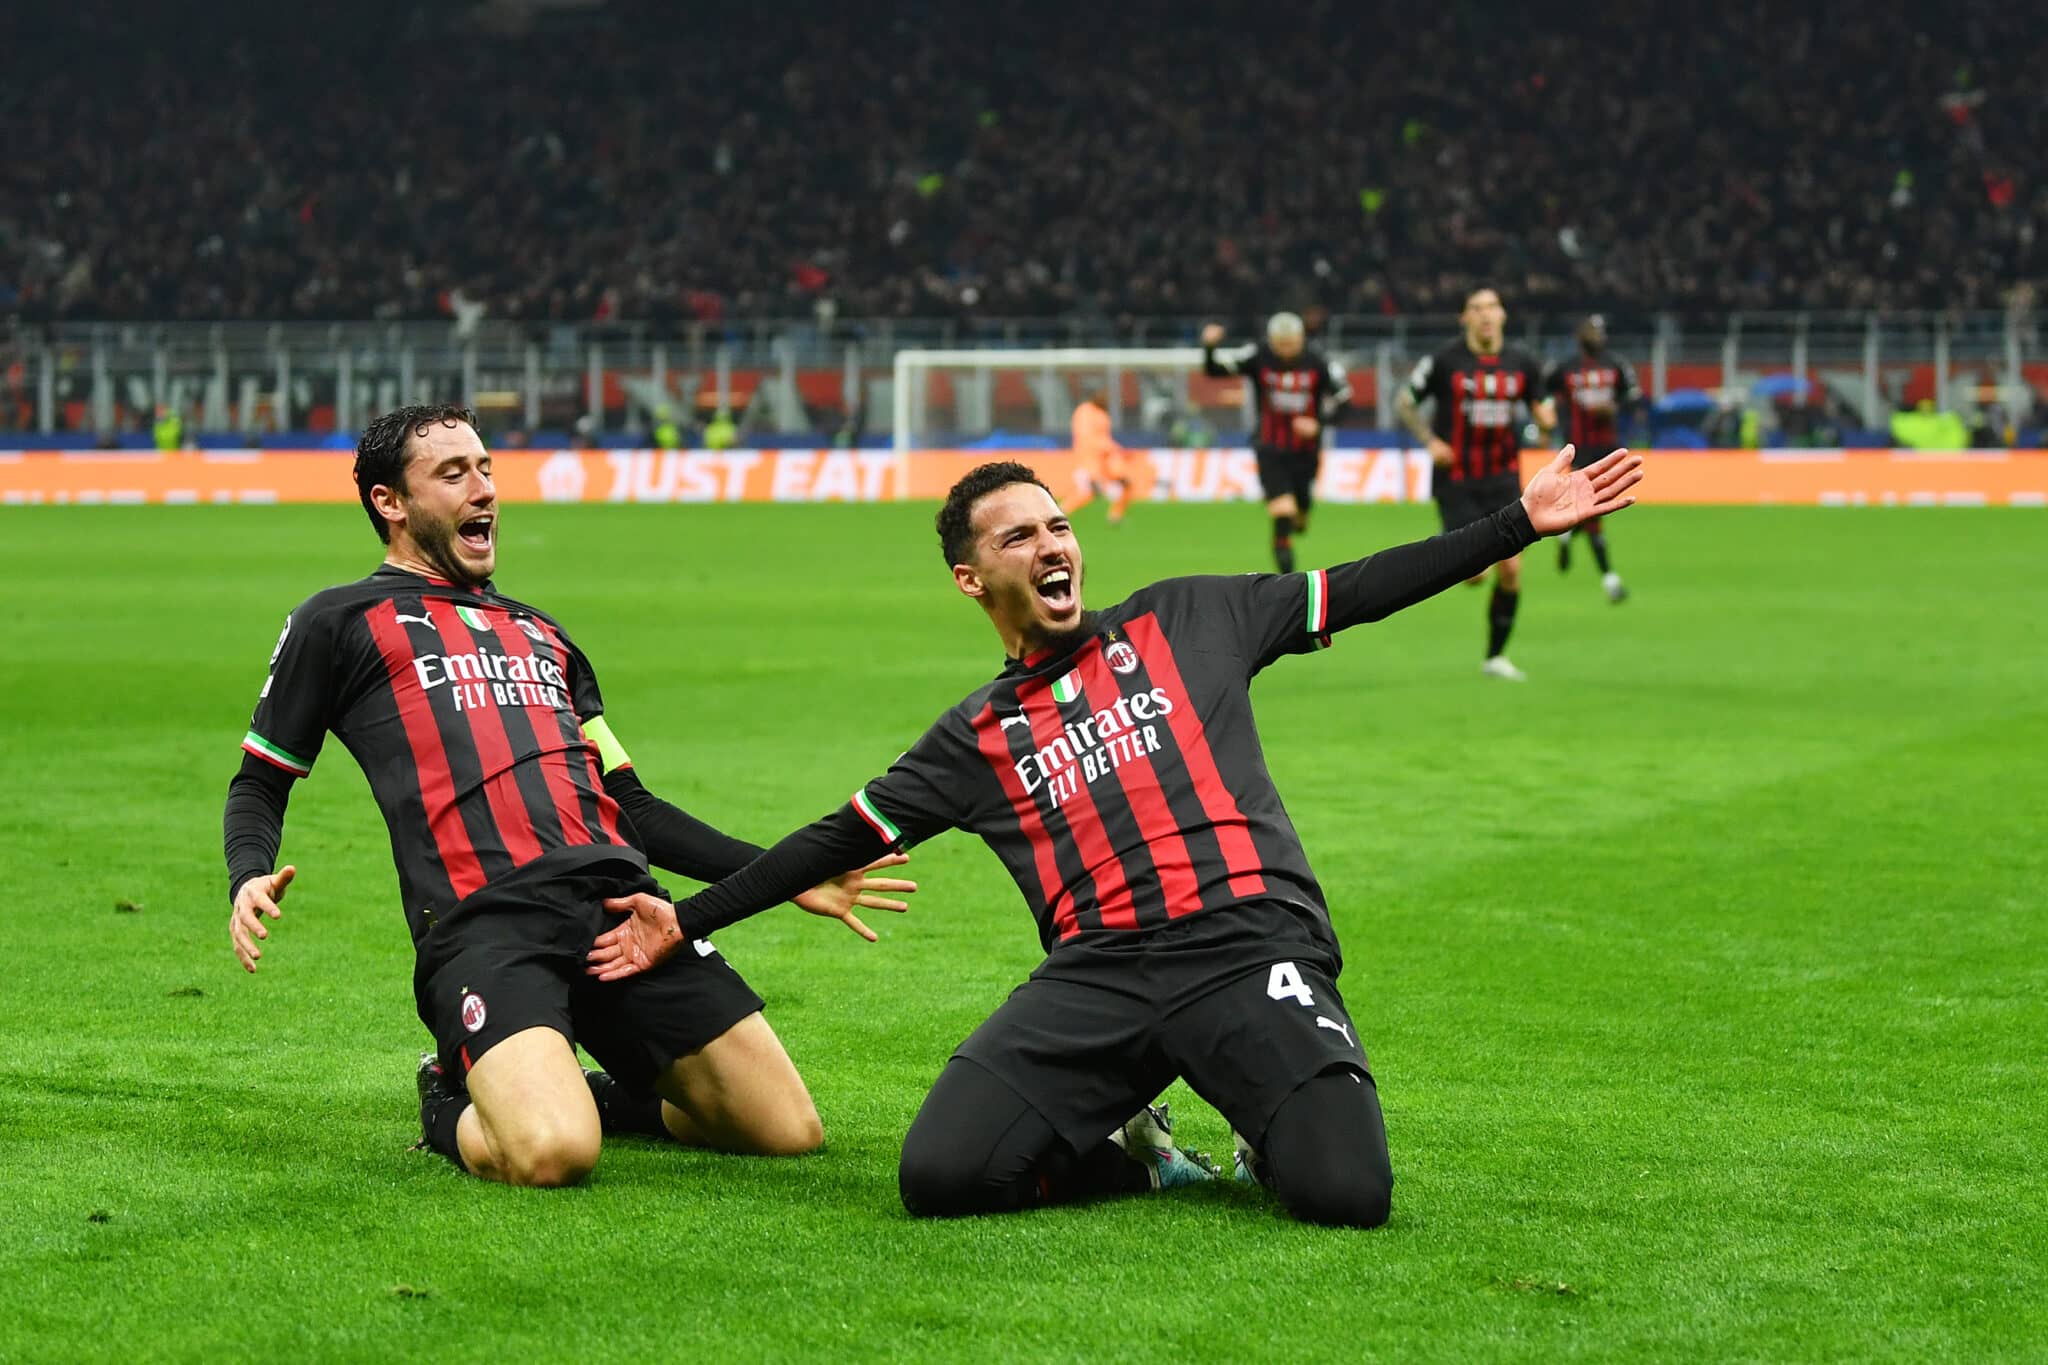 Legendary coach Arrigo Sacchi praised Milan and Napoli for their performances in the first leg of the Champions League’s quarter-finals.